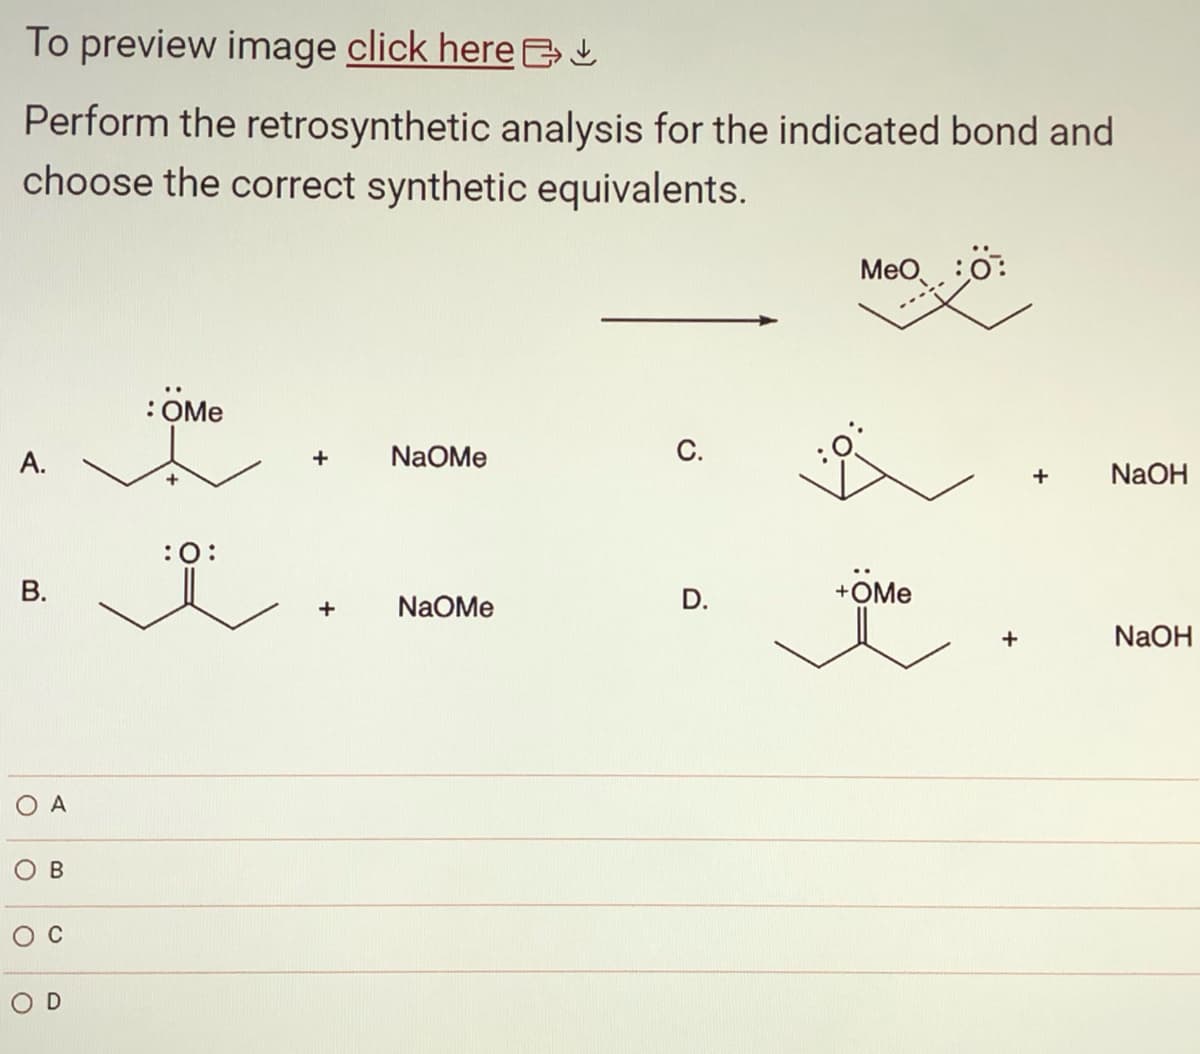 To preview image click here ↓
Perform the retrosynthetic analysis for the indicated bond and
choose the correct synthetic equivalents.
A.
B.
O A
B
D
: OMe
+
:0:
+ NaOMe
+
NaOMe
C.
D.
MeO
+ÖMe
+
NaOH
NaOH